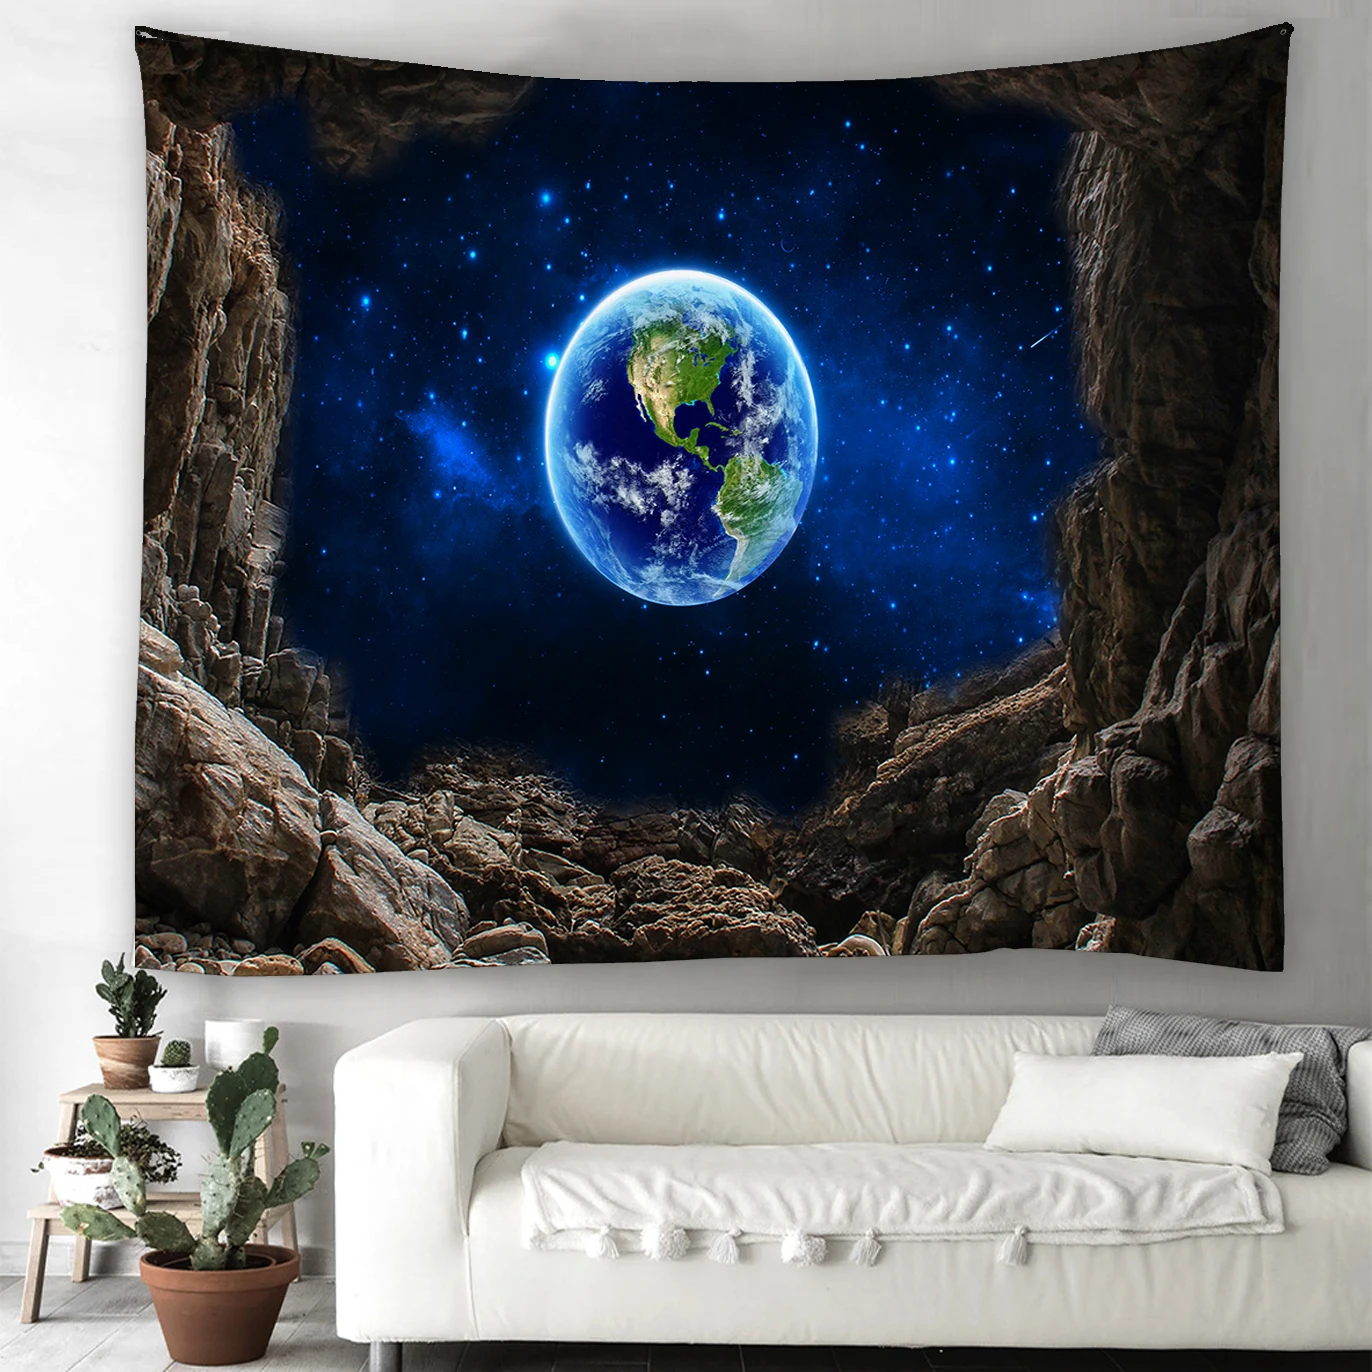 

Galaxy Earth Tapestry Wall Hanging Forest Tree Landscape Hippie Psychedelic Tapiz Starry Sky Dorm Home Decor Mandala Wall Carpet